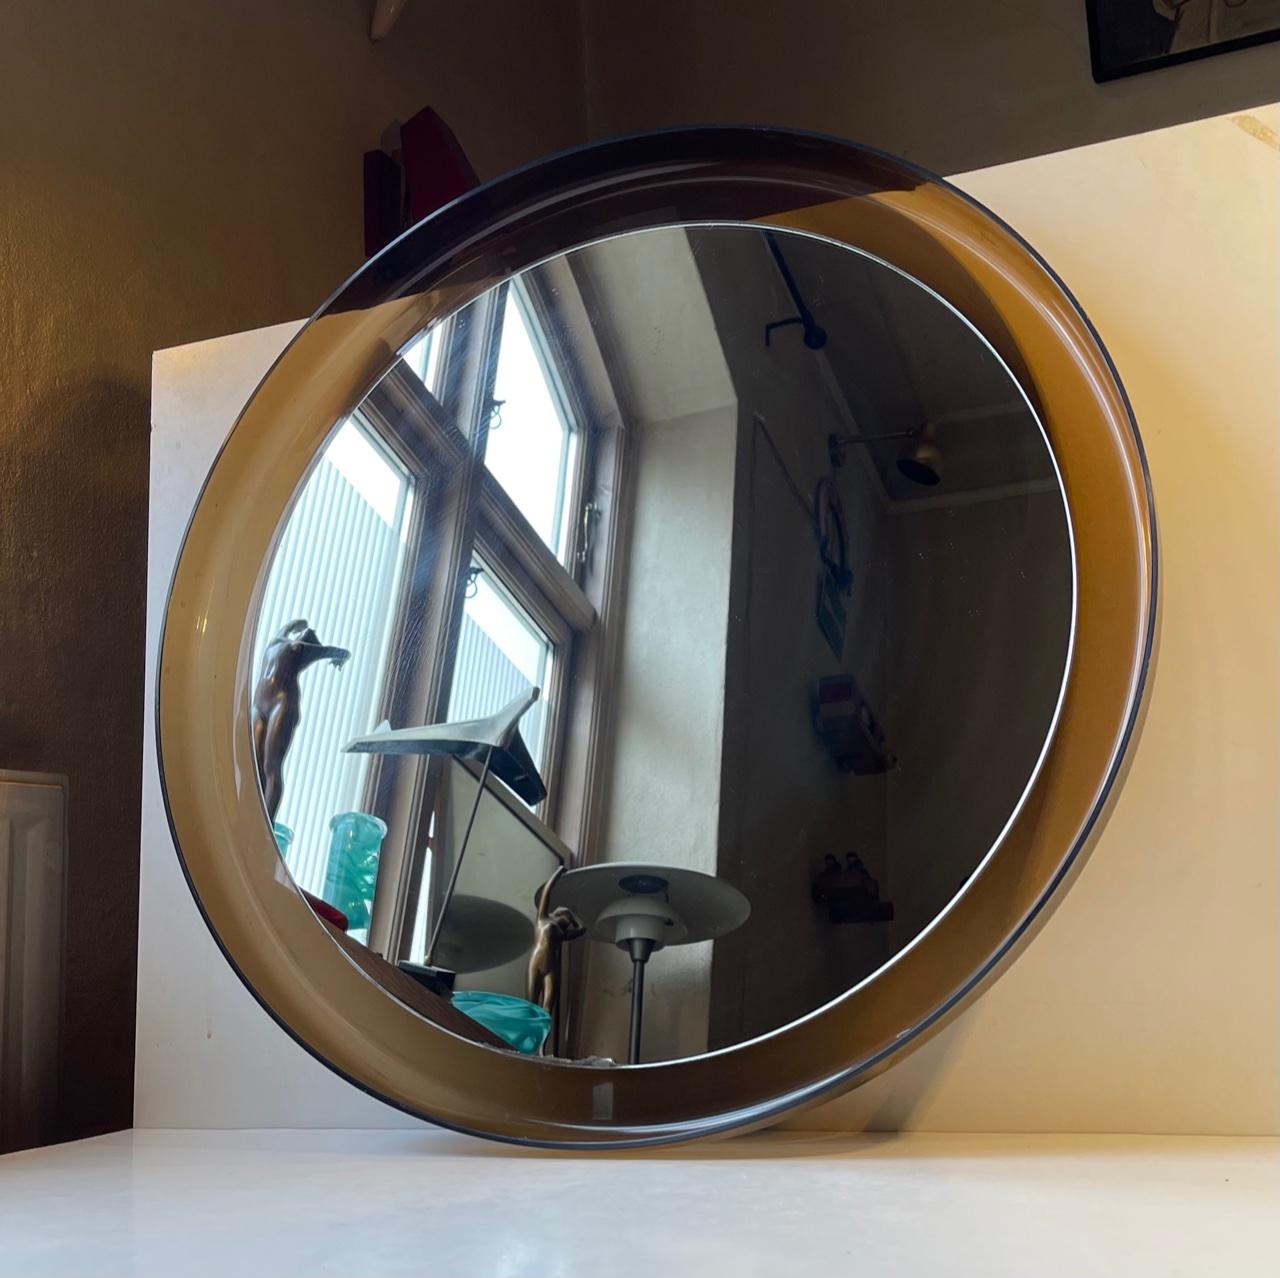 Circular wall mirror in smoke plexiglas designed by Makio Hasuike. Manufactured by Guzzini in Italy during the 1970s. Measurements: Diameter: 56 cm, Dept: 4.5 cm.